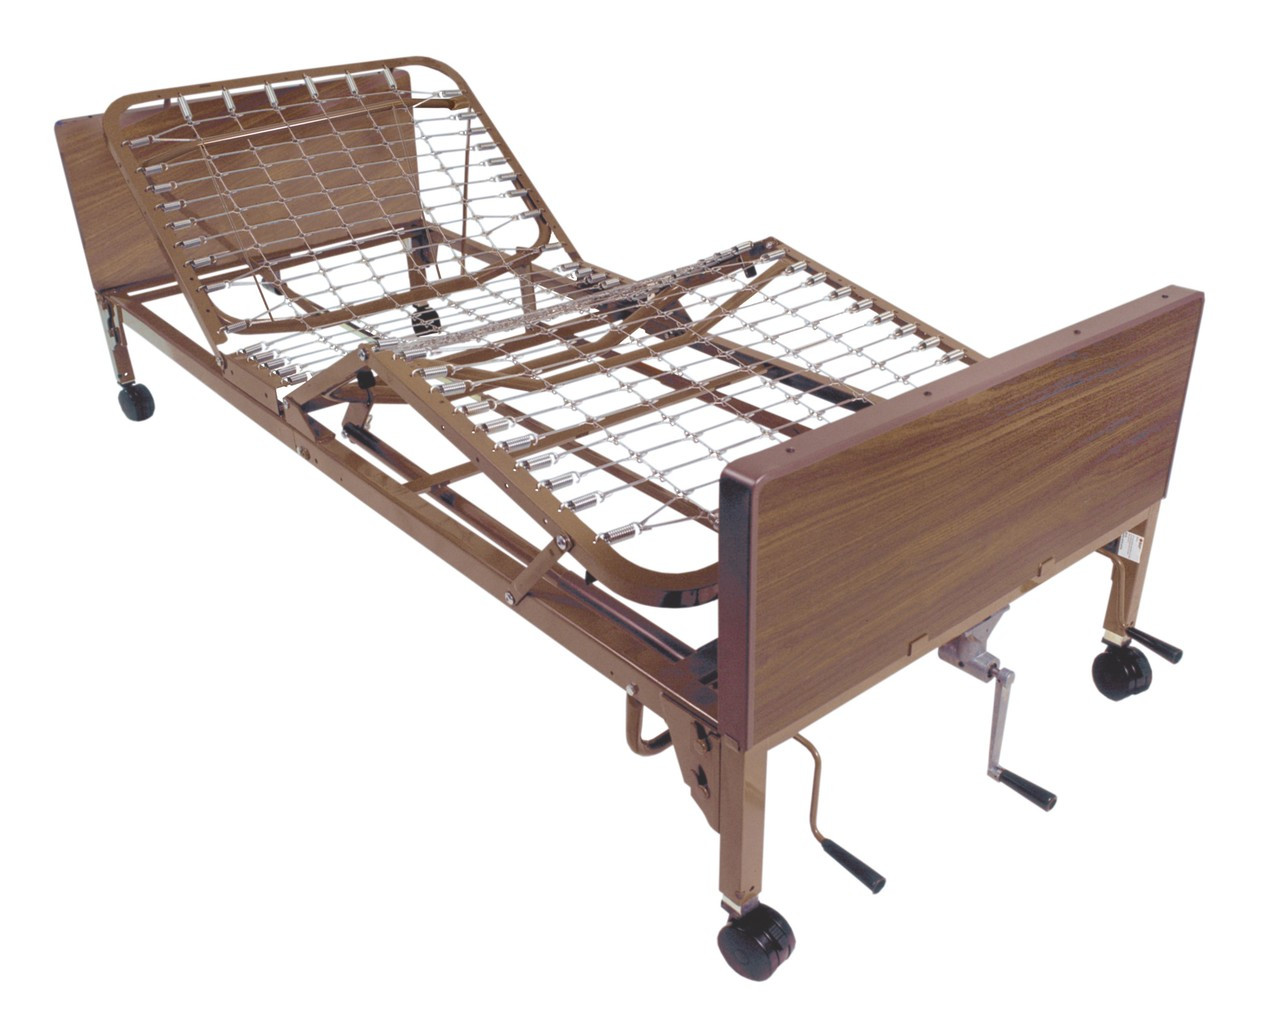 Drive 15003BV-HR Multi Height Manual Hospital Bed with Half Rails (15003BV-HR)